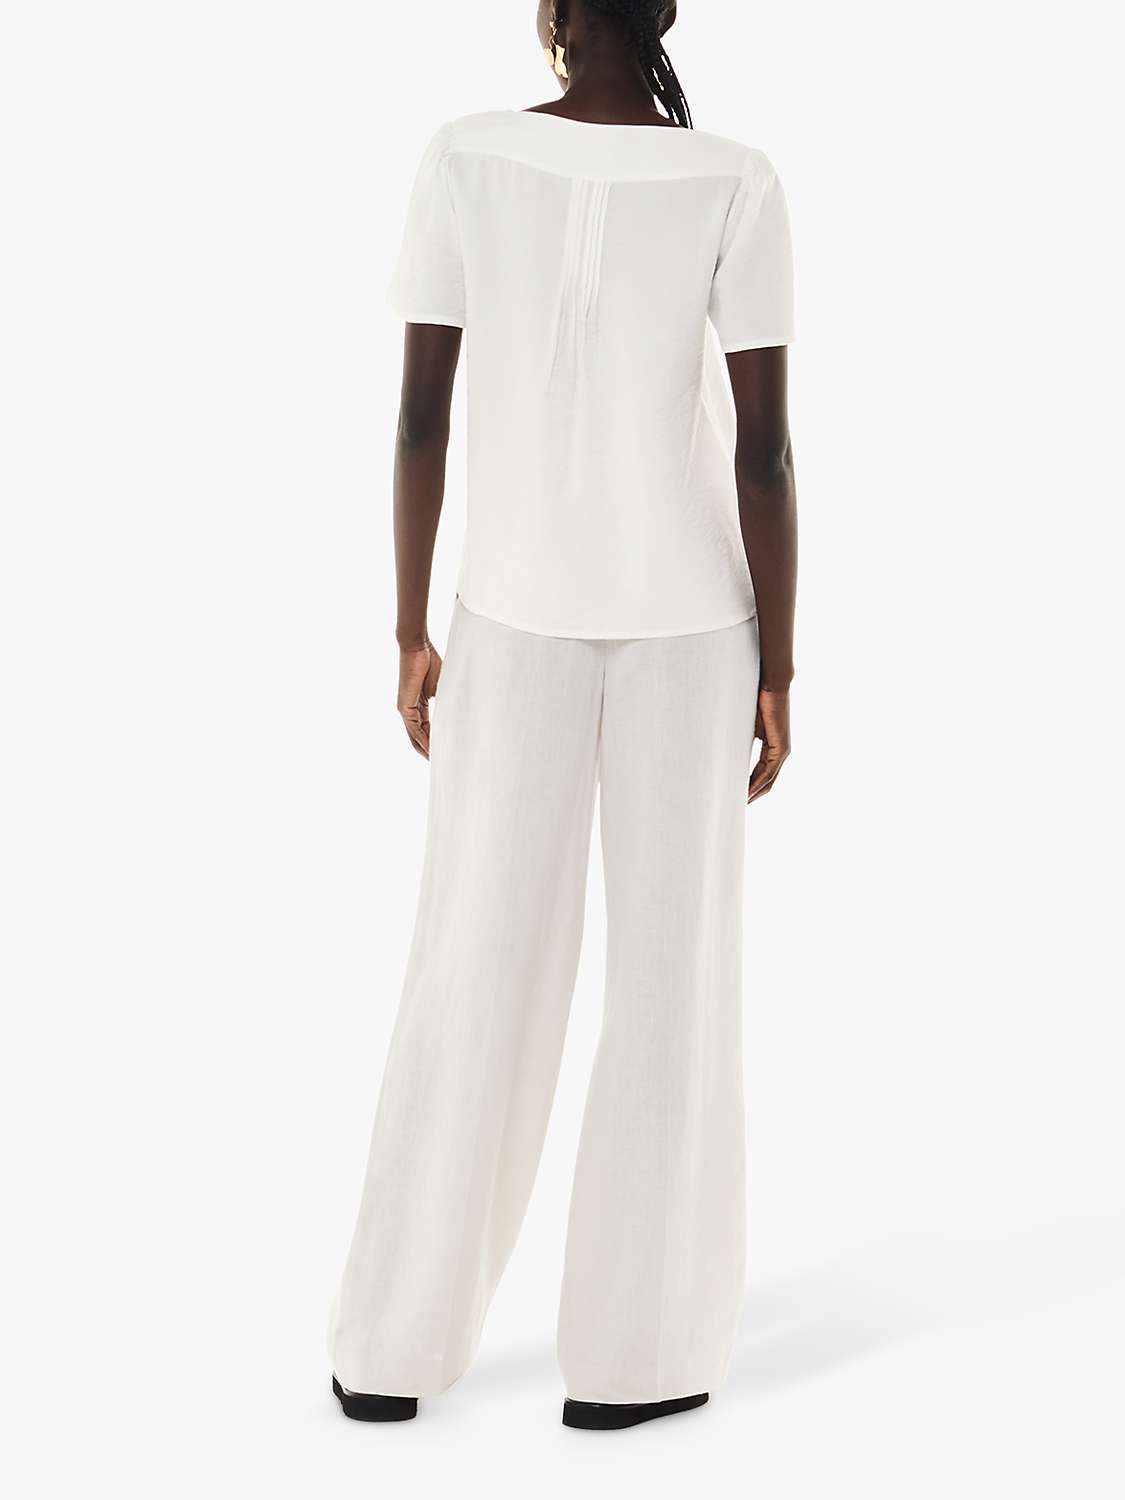 Whistles Lily Square Neck Blouse, White at John Lewis & Partners